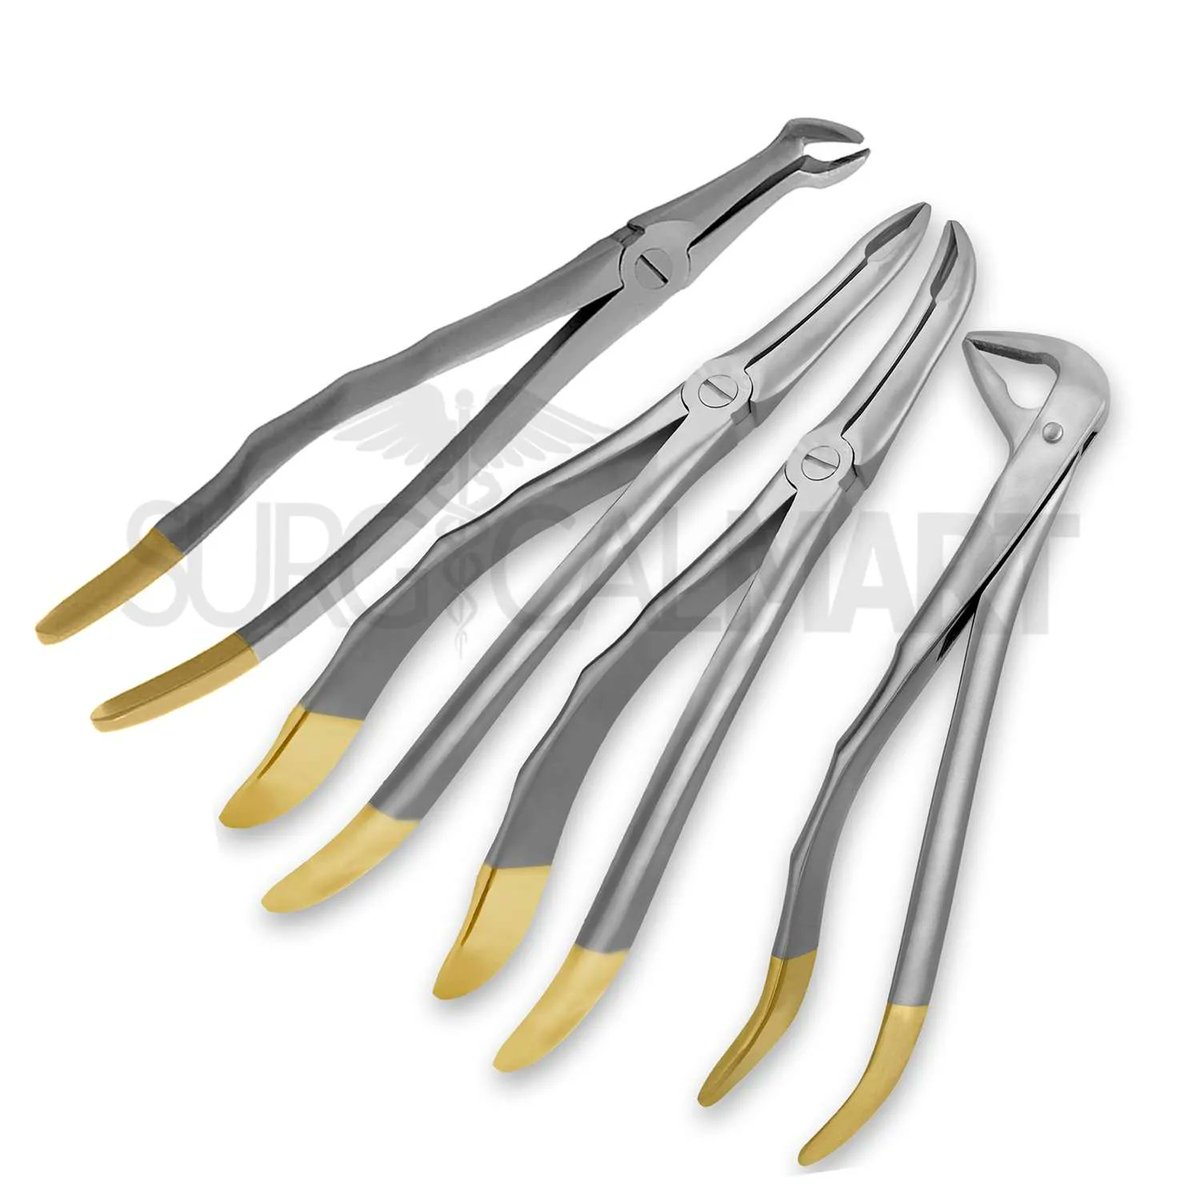 🔥 SAVE 45% OFF⚡4 Dental Root Tip #ExtractingForceps SetDiamond Dusted Gold Handle🦷
Order now 👉 surgicalmart.com/shop/dental-in…

#surgicalmart #rootextractingforceps #roottipextractingforceps #toothextractionforcep #dentalextractions #dentalsurgery #dentalforceps  #shoponline